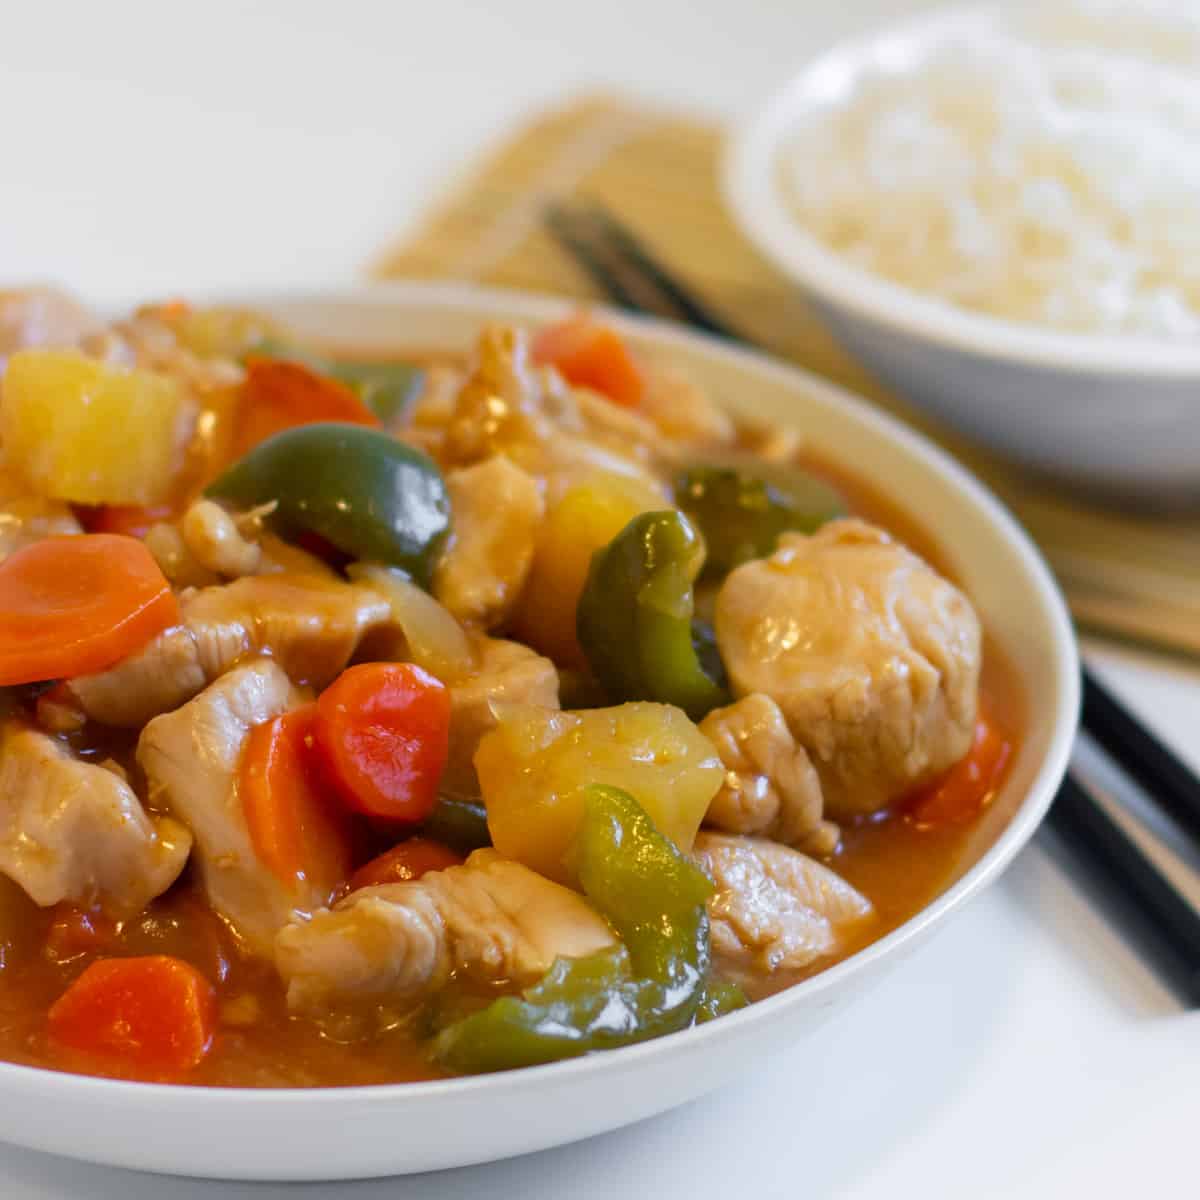 A close up picture of a sweet and sour stir fry.